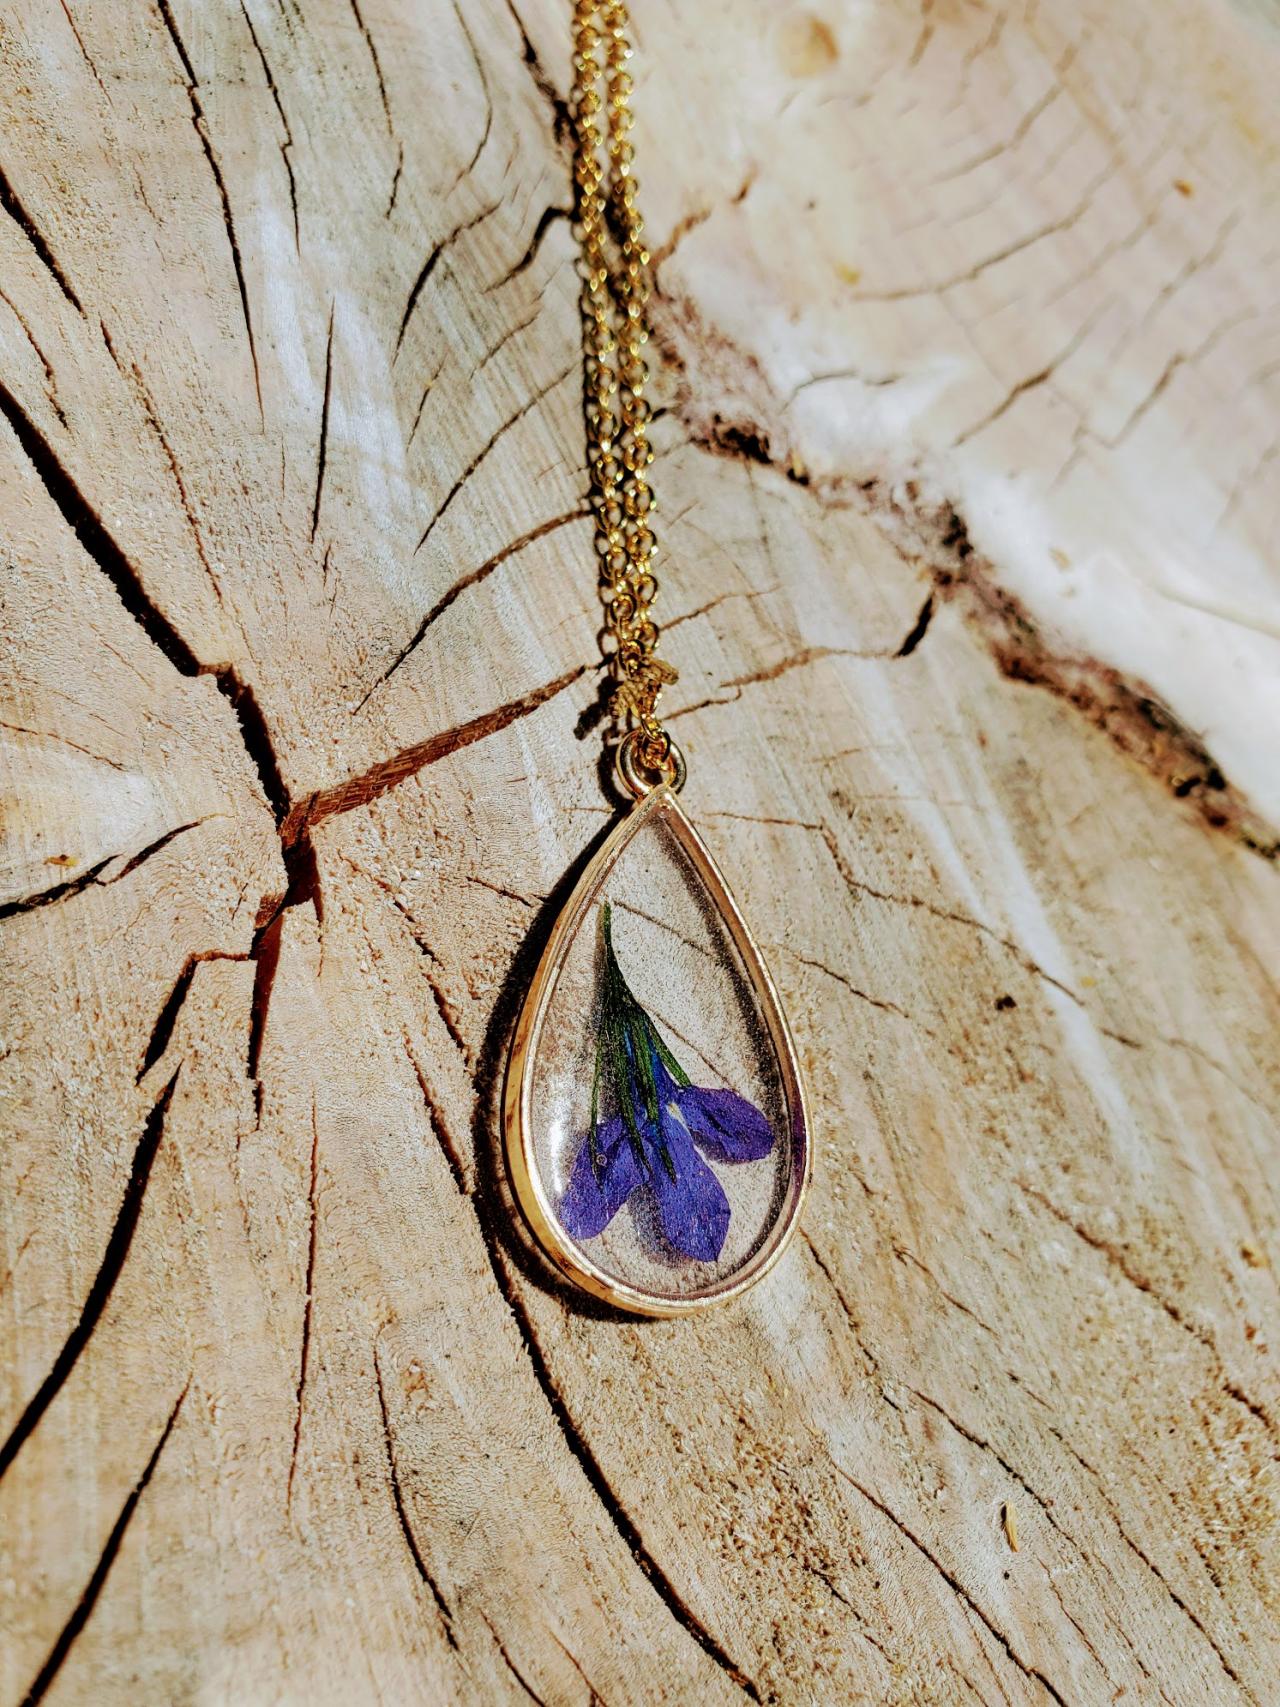 Resin Jewelry Necklace Teardrop Rectangle Pendant Gold Antique Silver Chain Nature Flower Leaf